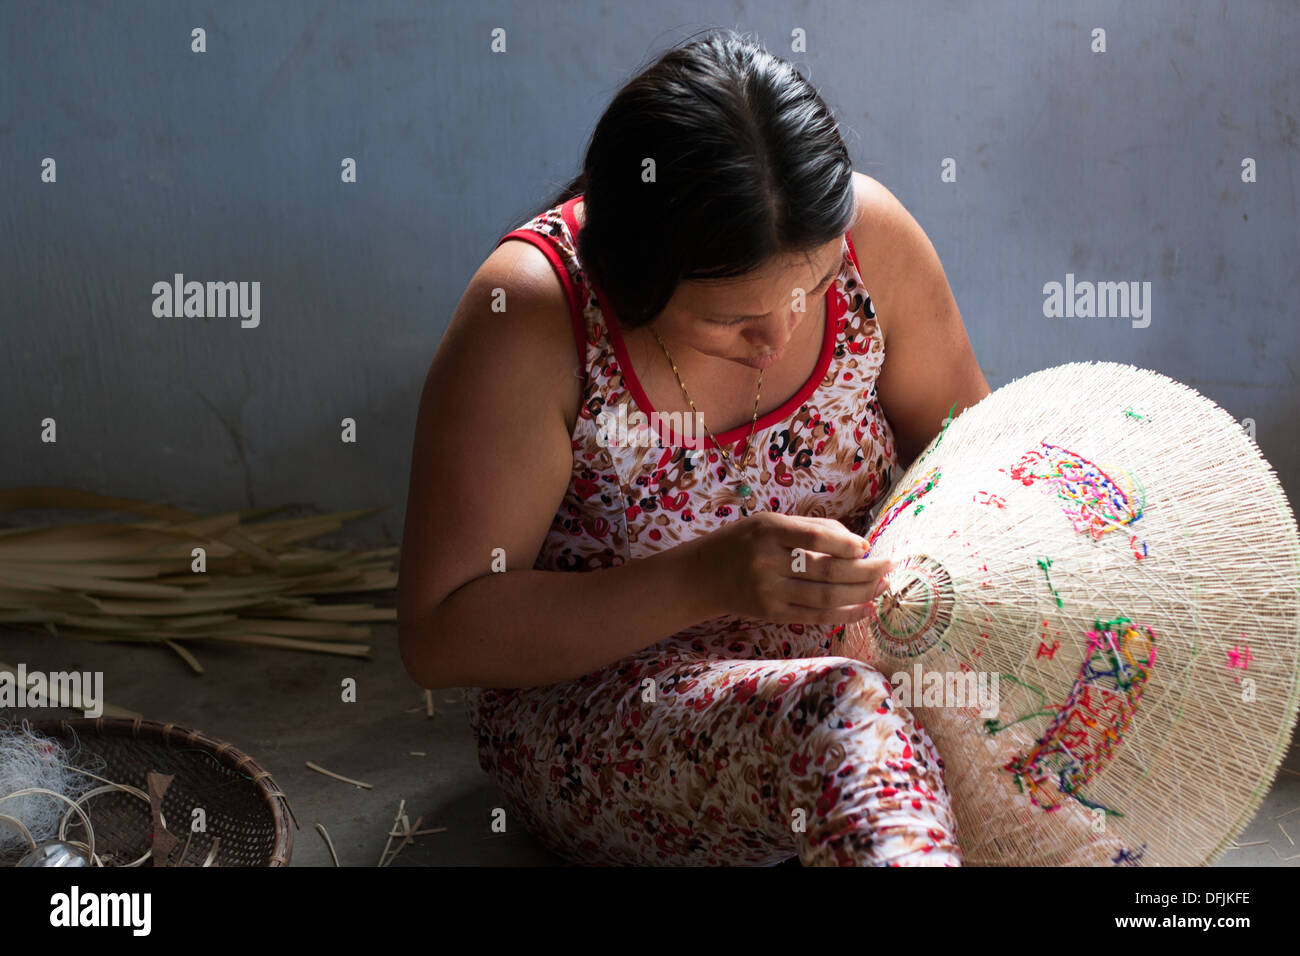 Group of Vietnamese woman working as handicraftsman to make conical straw hat at trade village, Vietnam Stock Photo